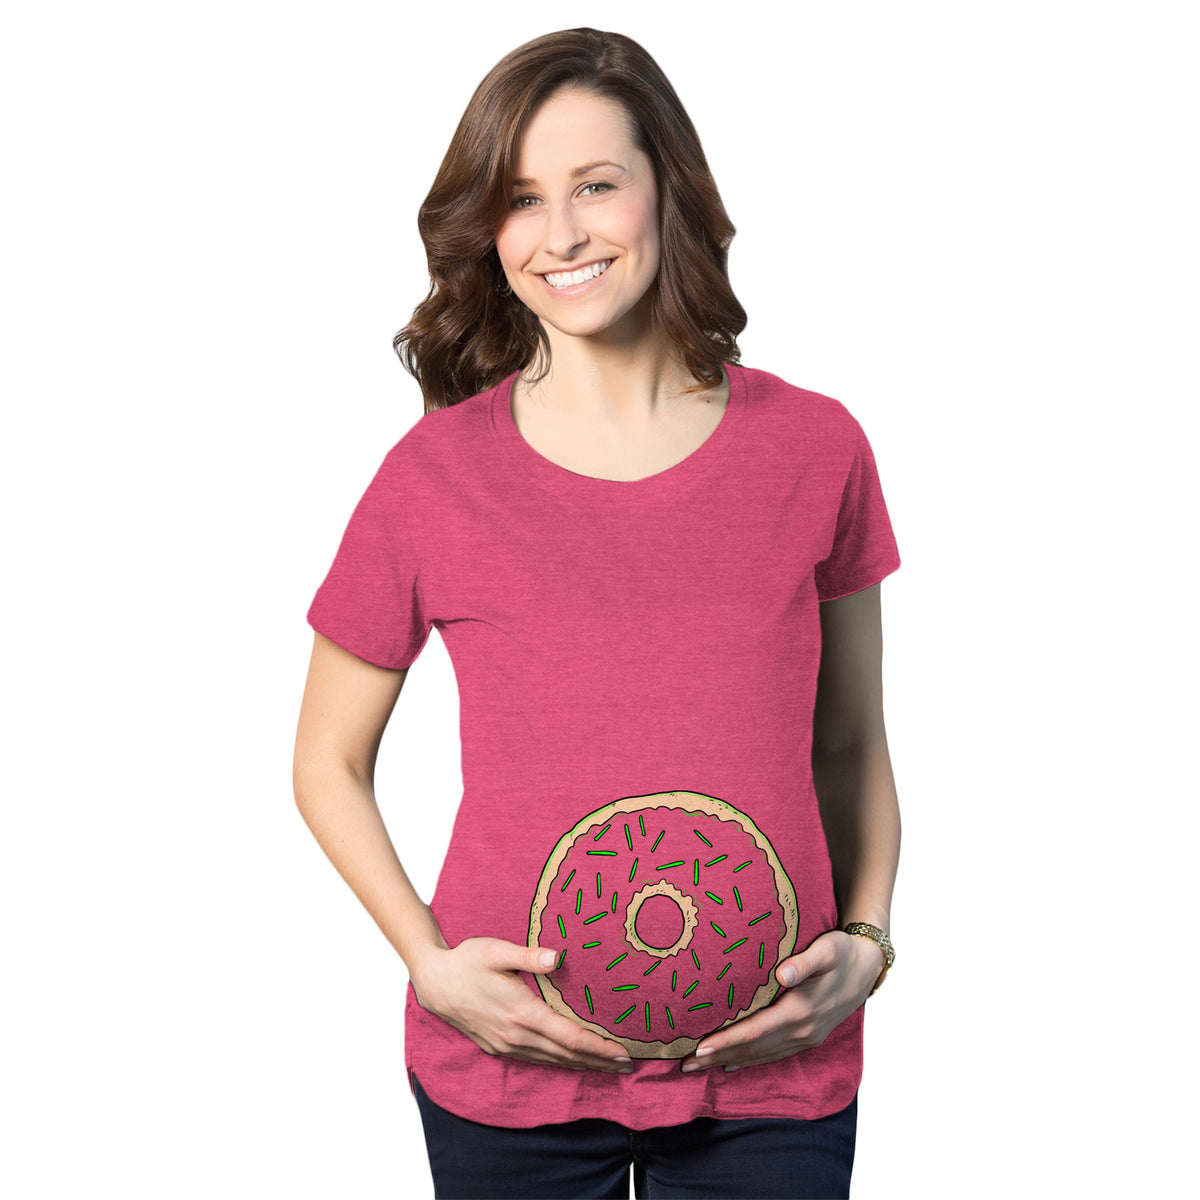 Funny Pink Donut Baby Bump Maternity T Shirt Nerdy food Tee